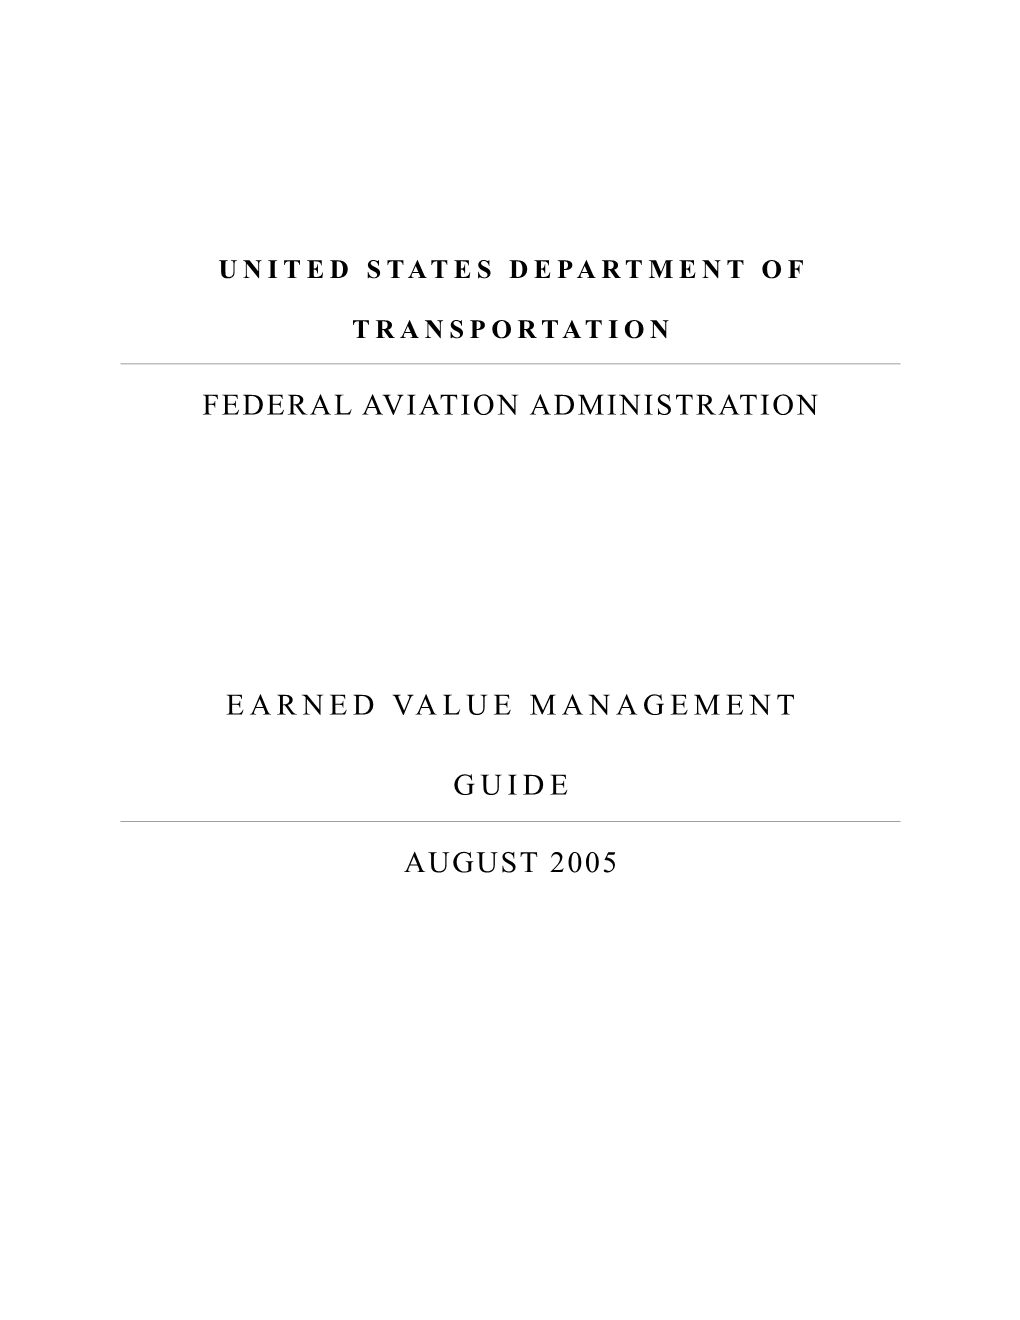 FAA Earned Value Management Guidance